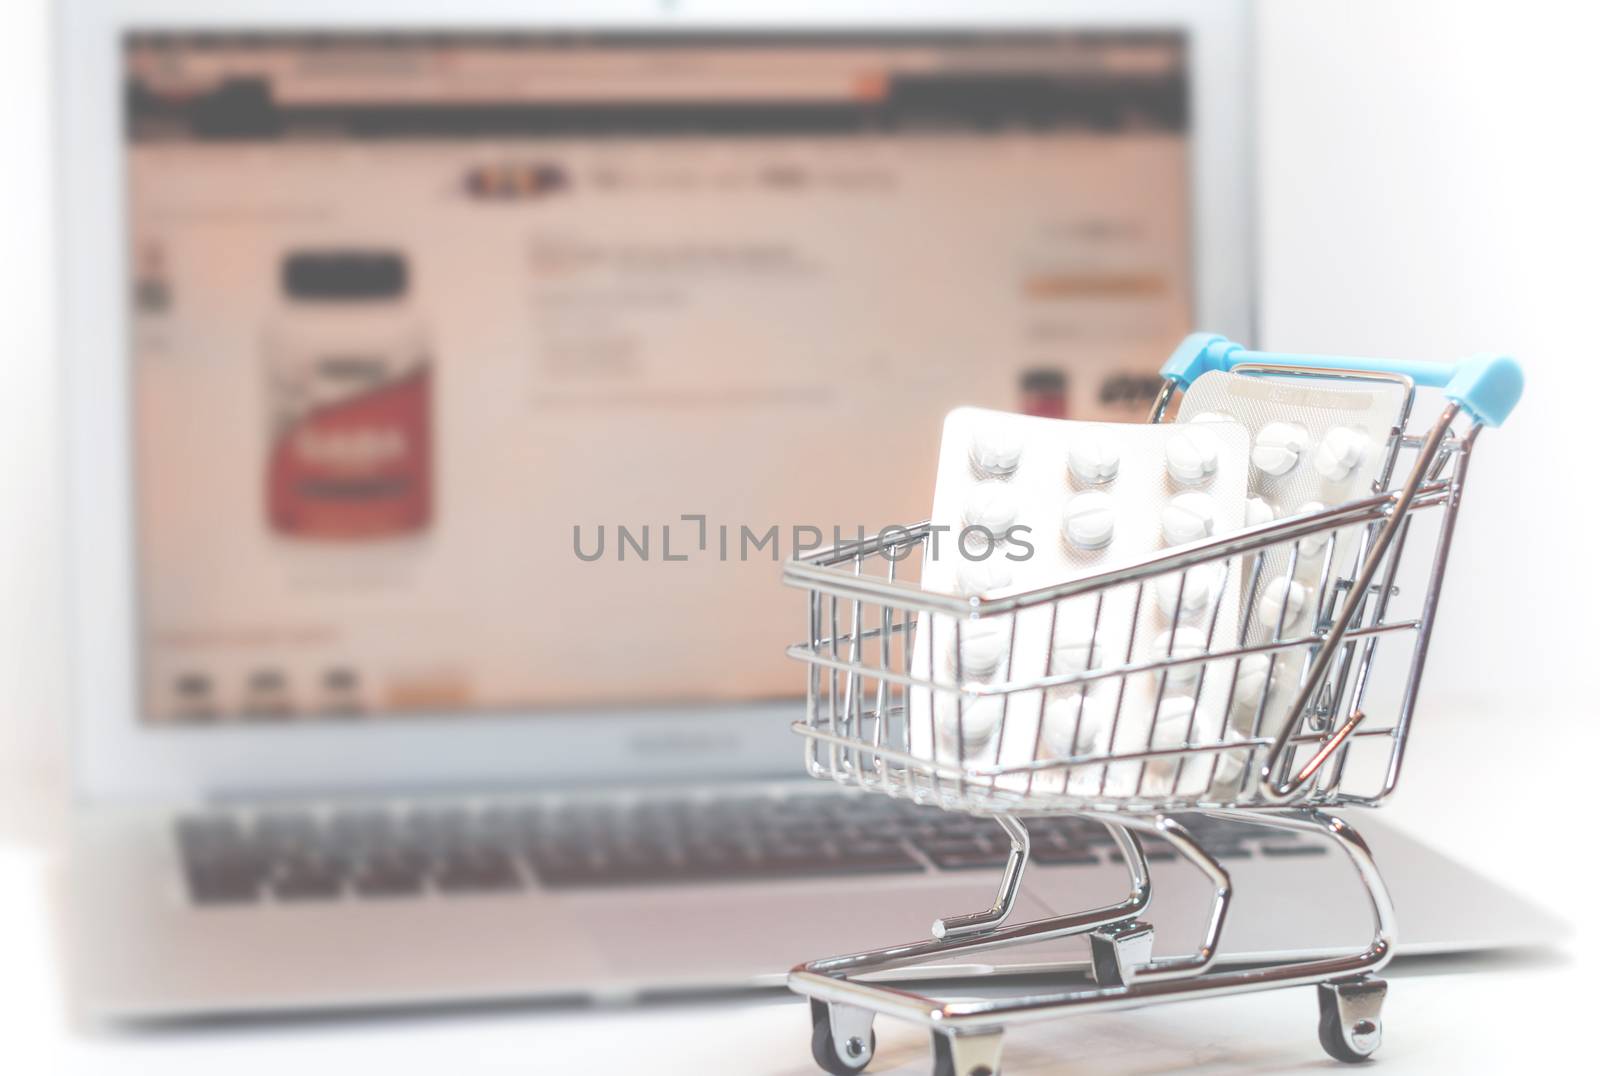 Vienna Austria March.30 2018,Online supplements shopping concept, shopping-cart placed on laptop isolated